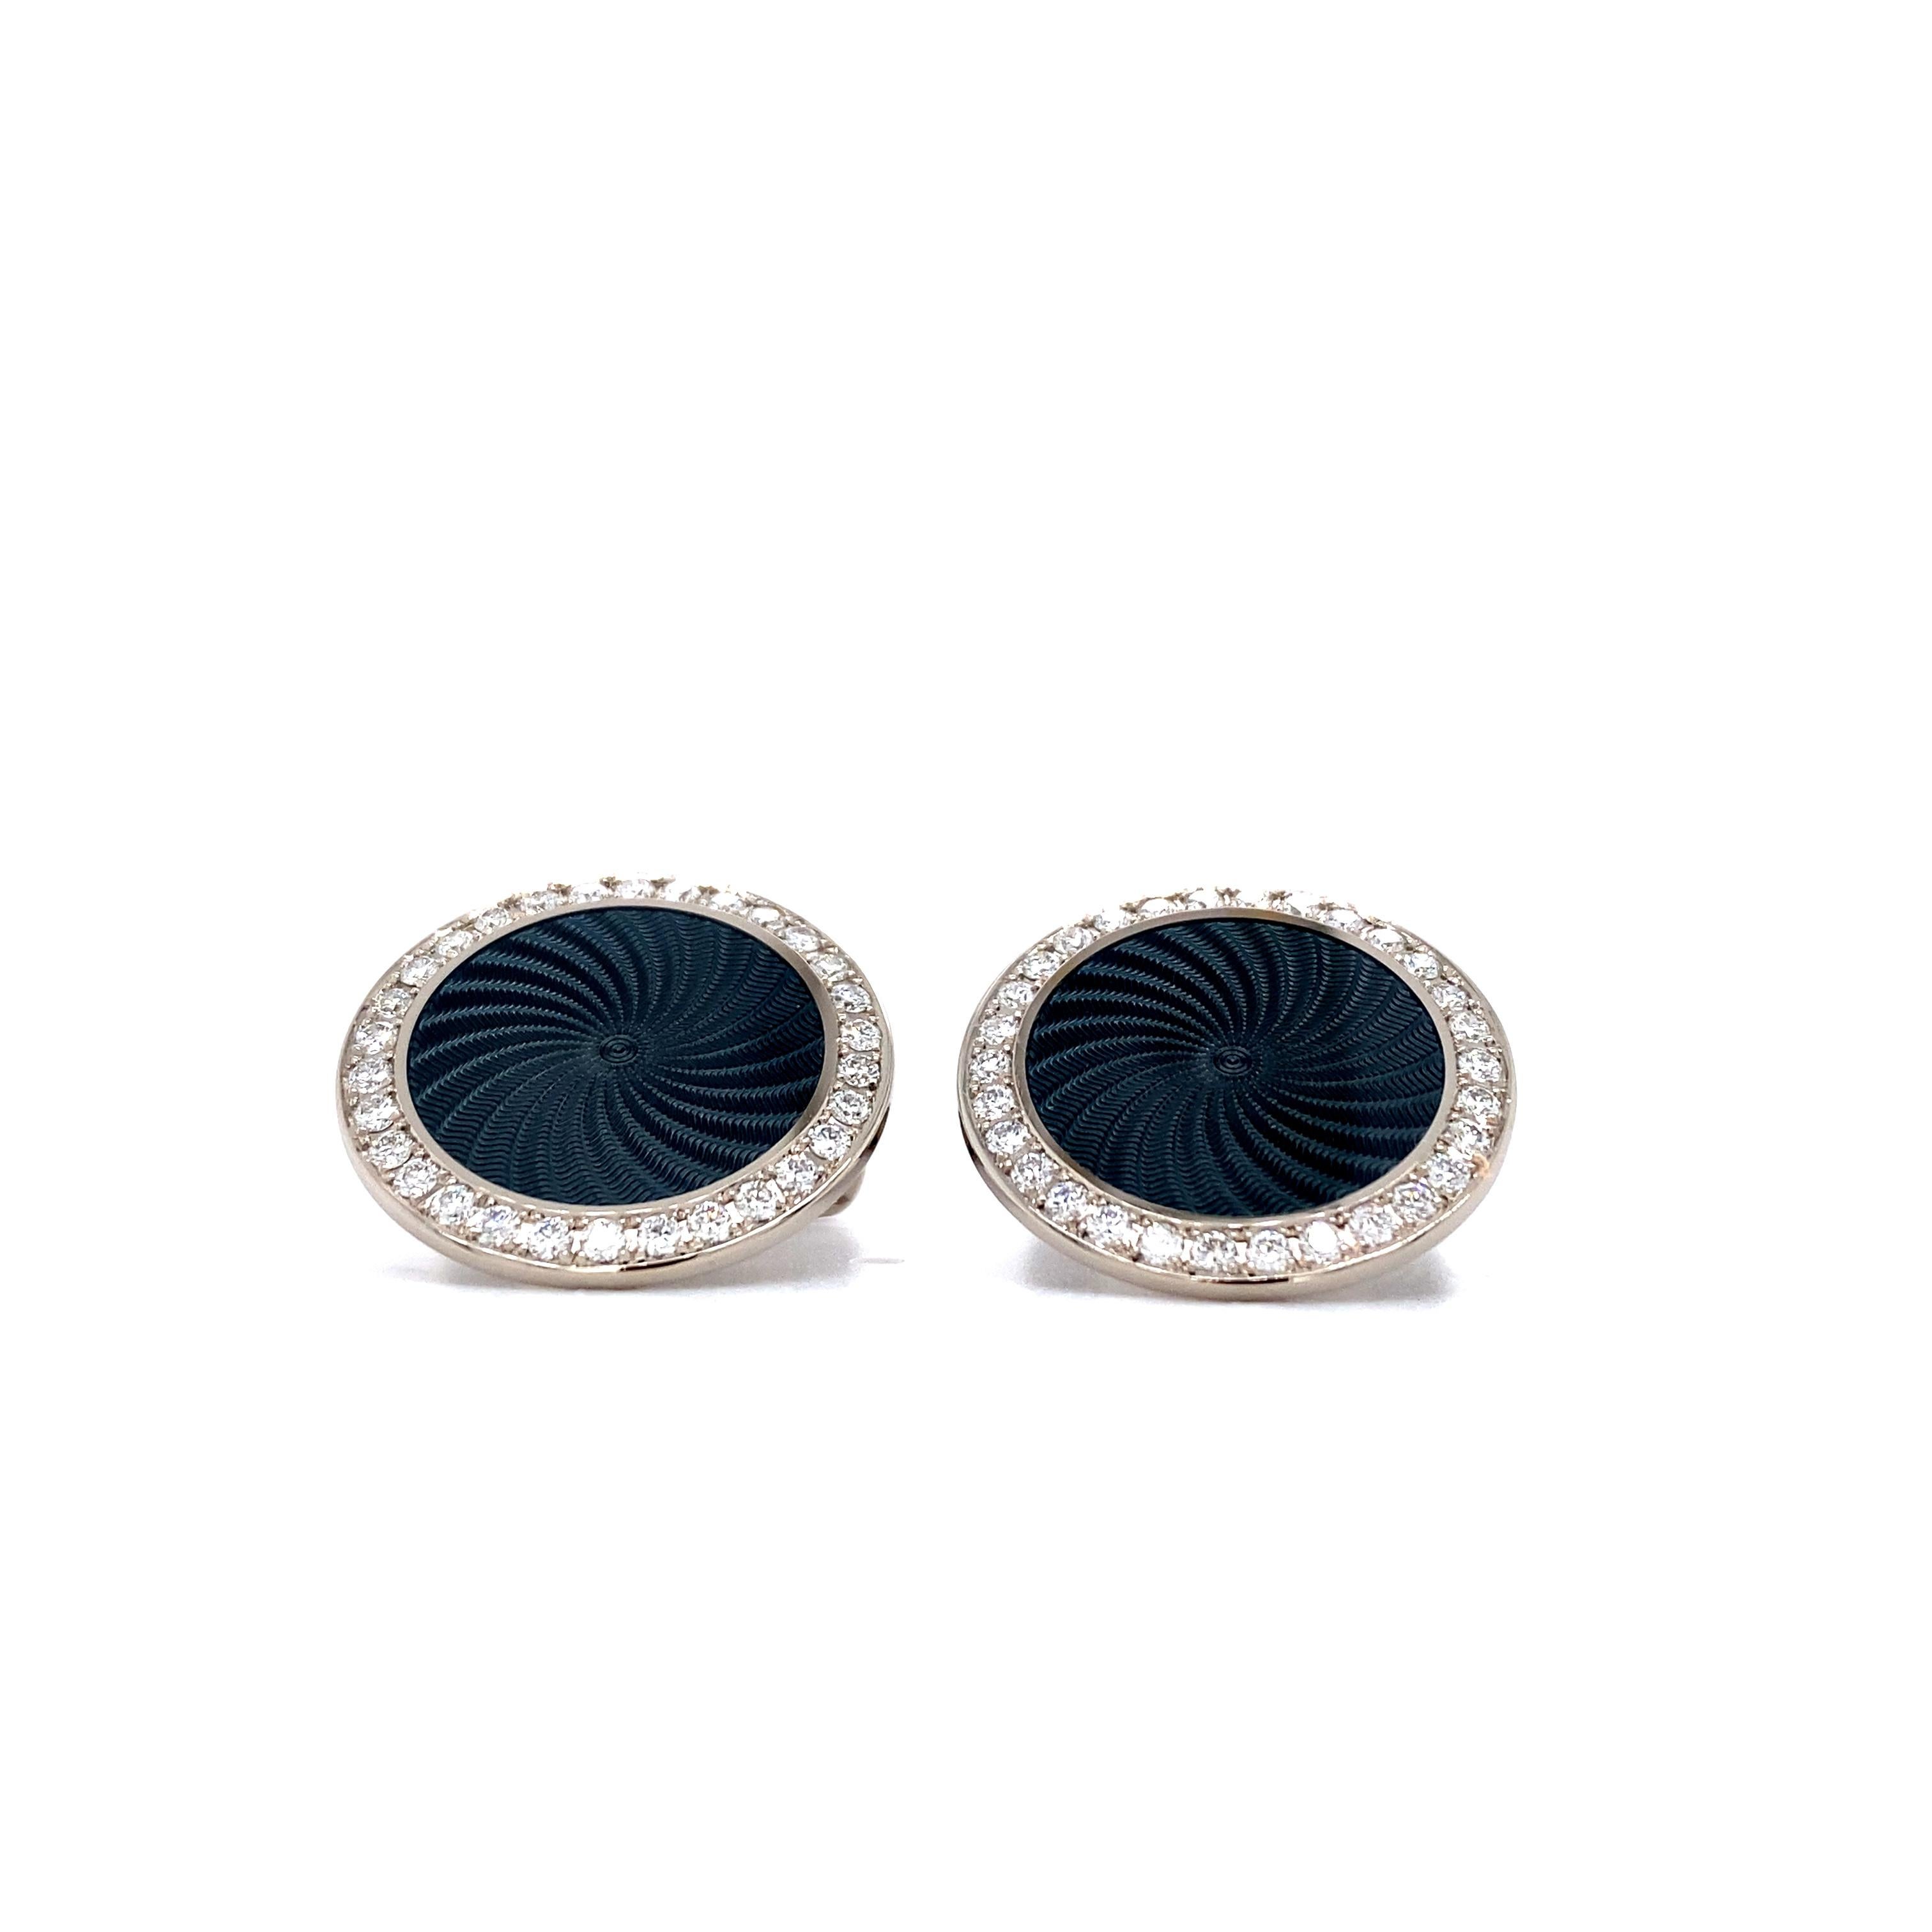 Contemporary Victor Mayer Round Cufflinks in 18k White Gold with Diamonds & Grey Enamel For Sale